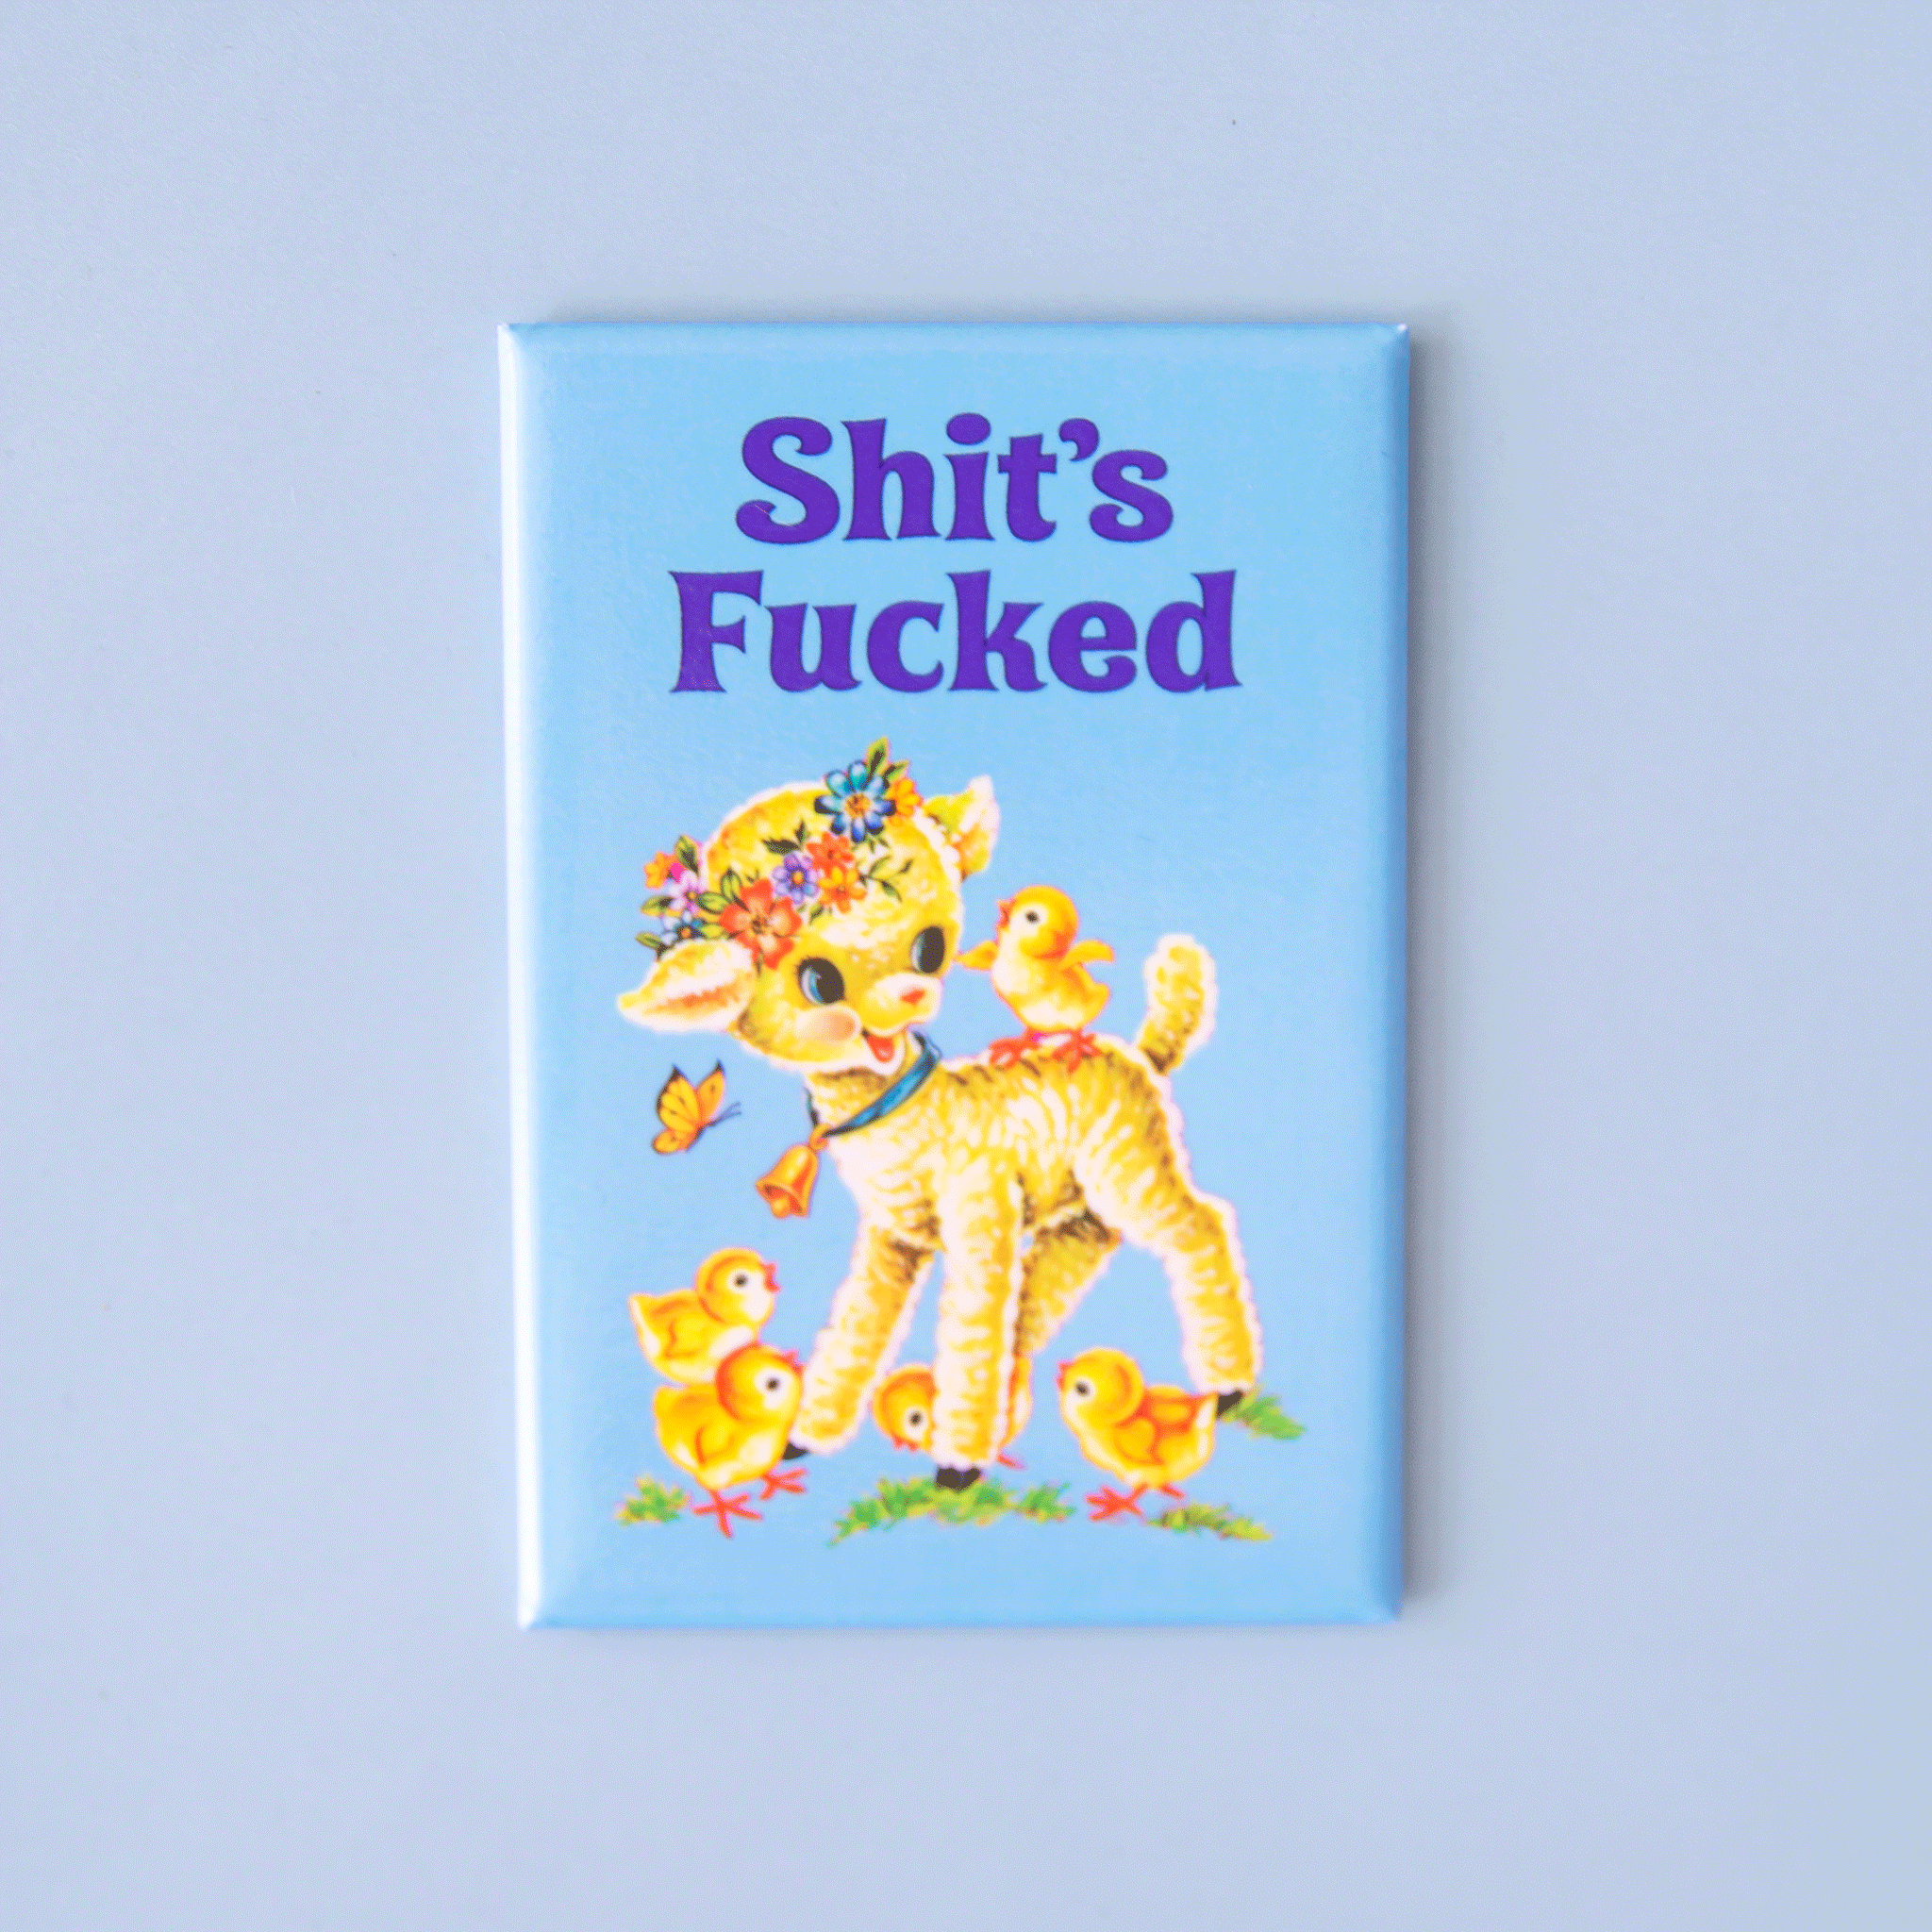 On a blue background is a blue rectangle magnet with a graphic of a yellow lamb and baby chicks along with blue text above that reads, "Shit's Fucked". 